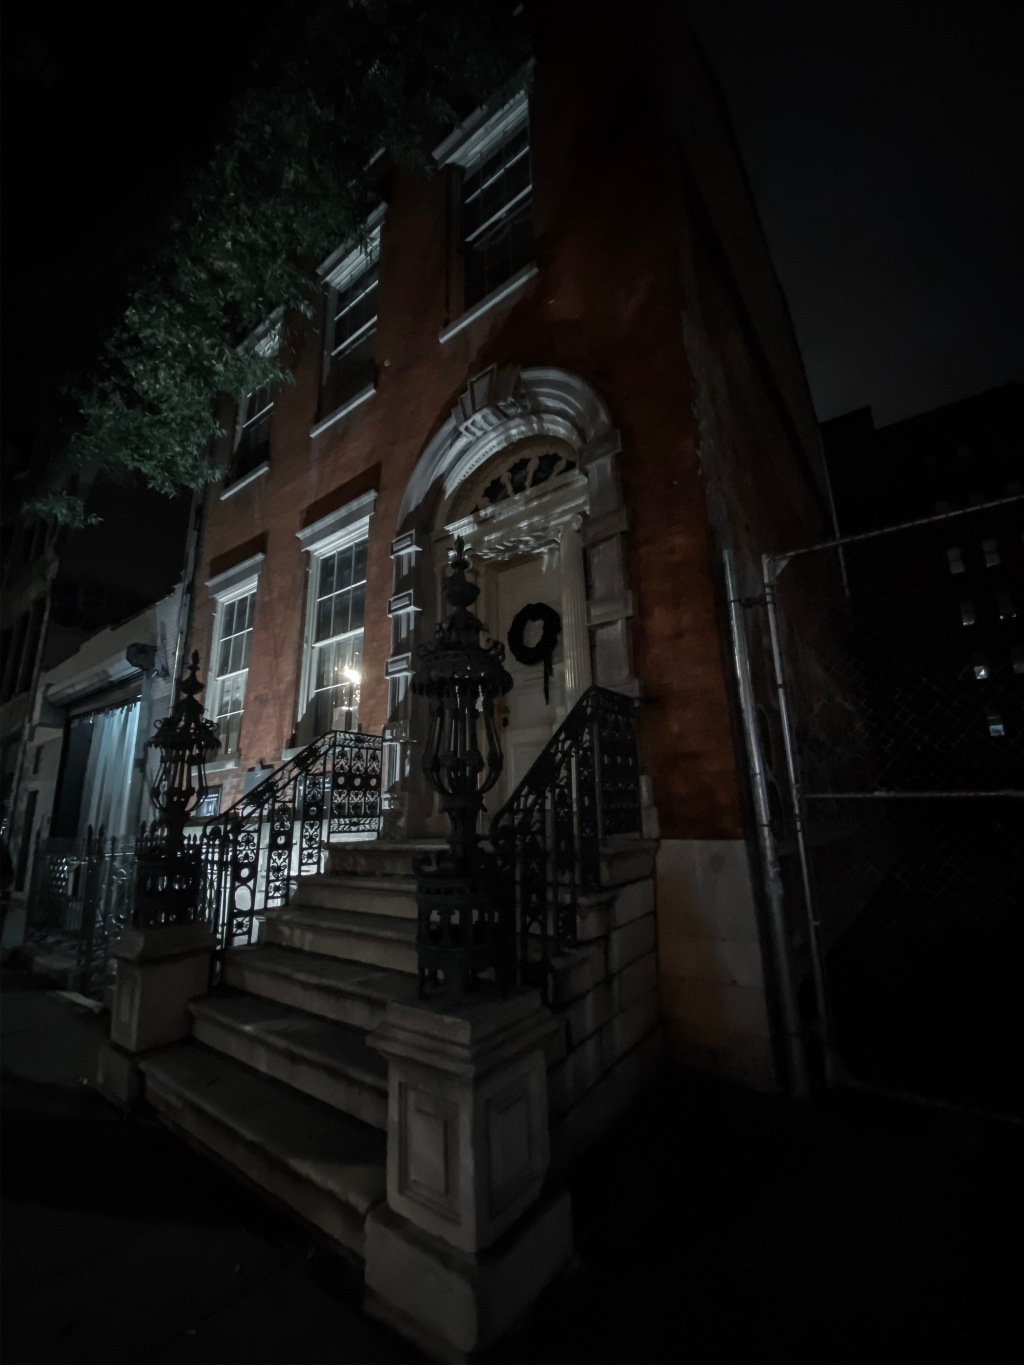 The Spirit of Halloween: A Candlelit Ghost Tour of Manhattan’s Most Haunted House